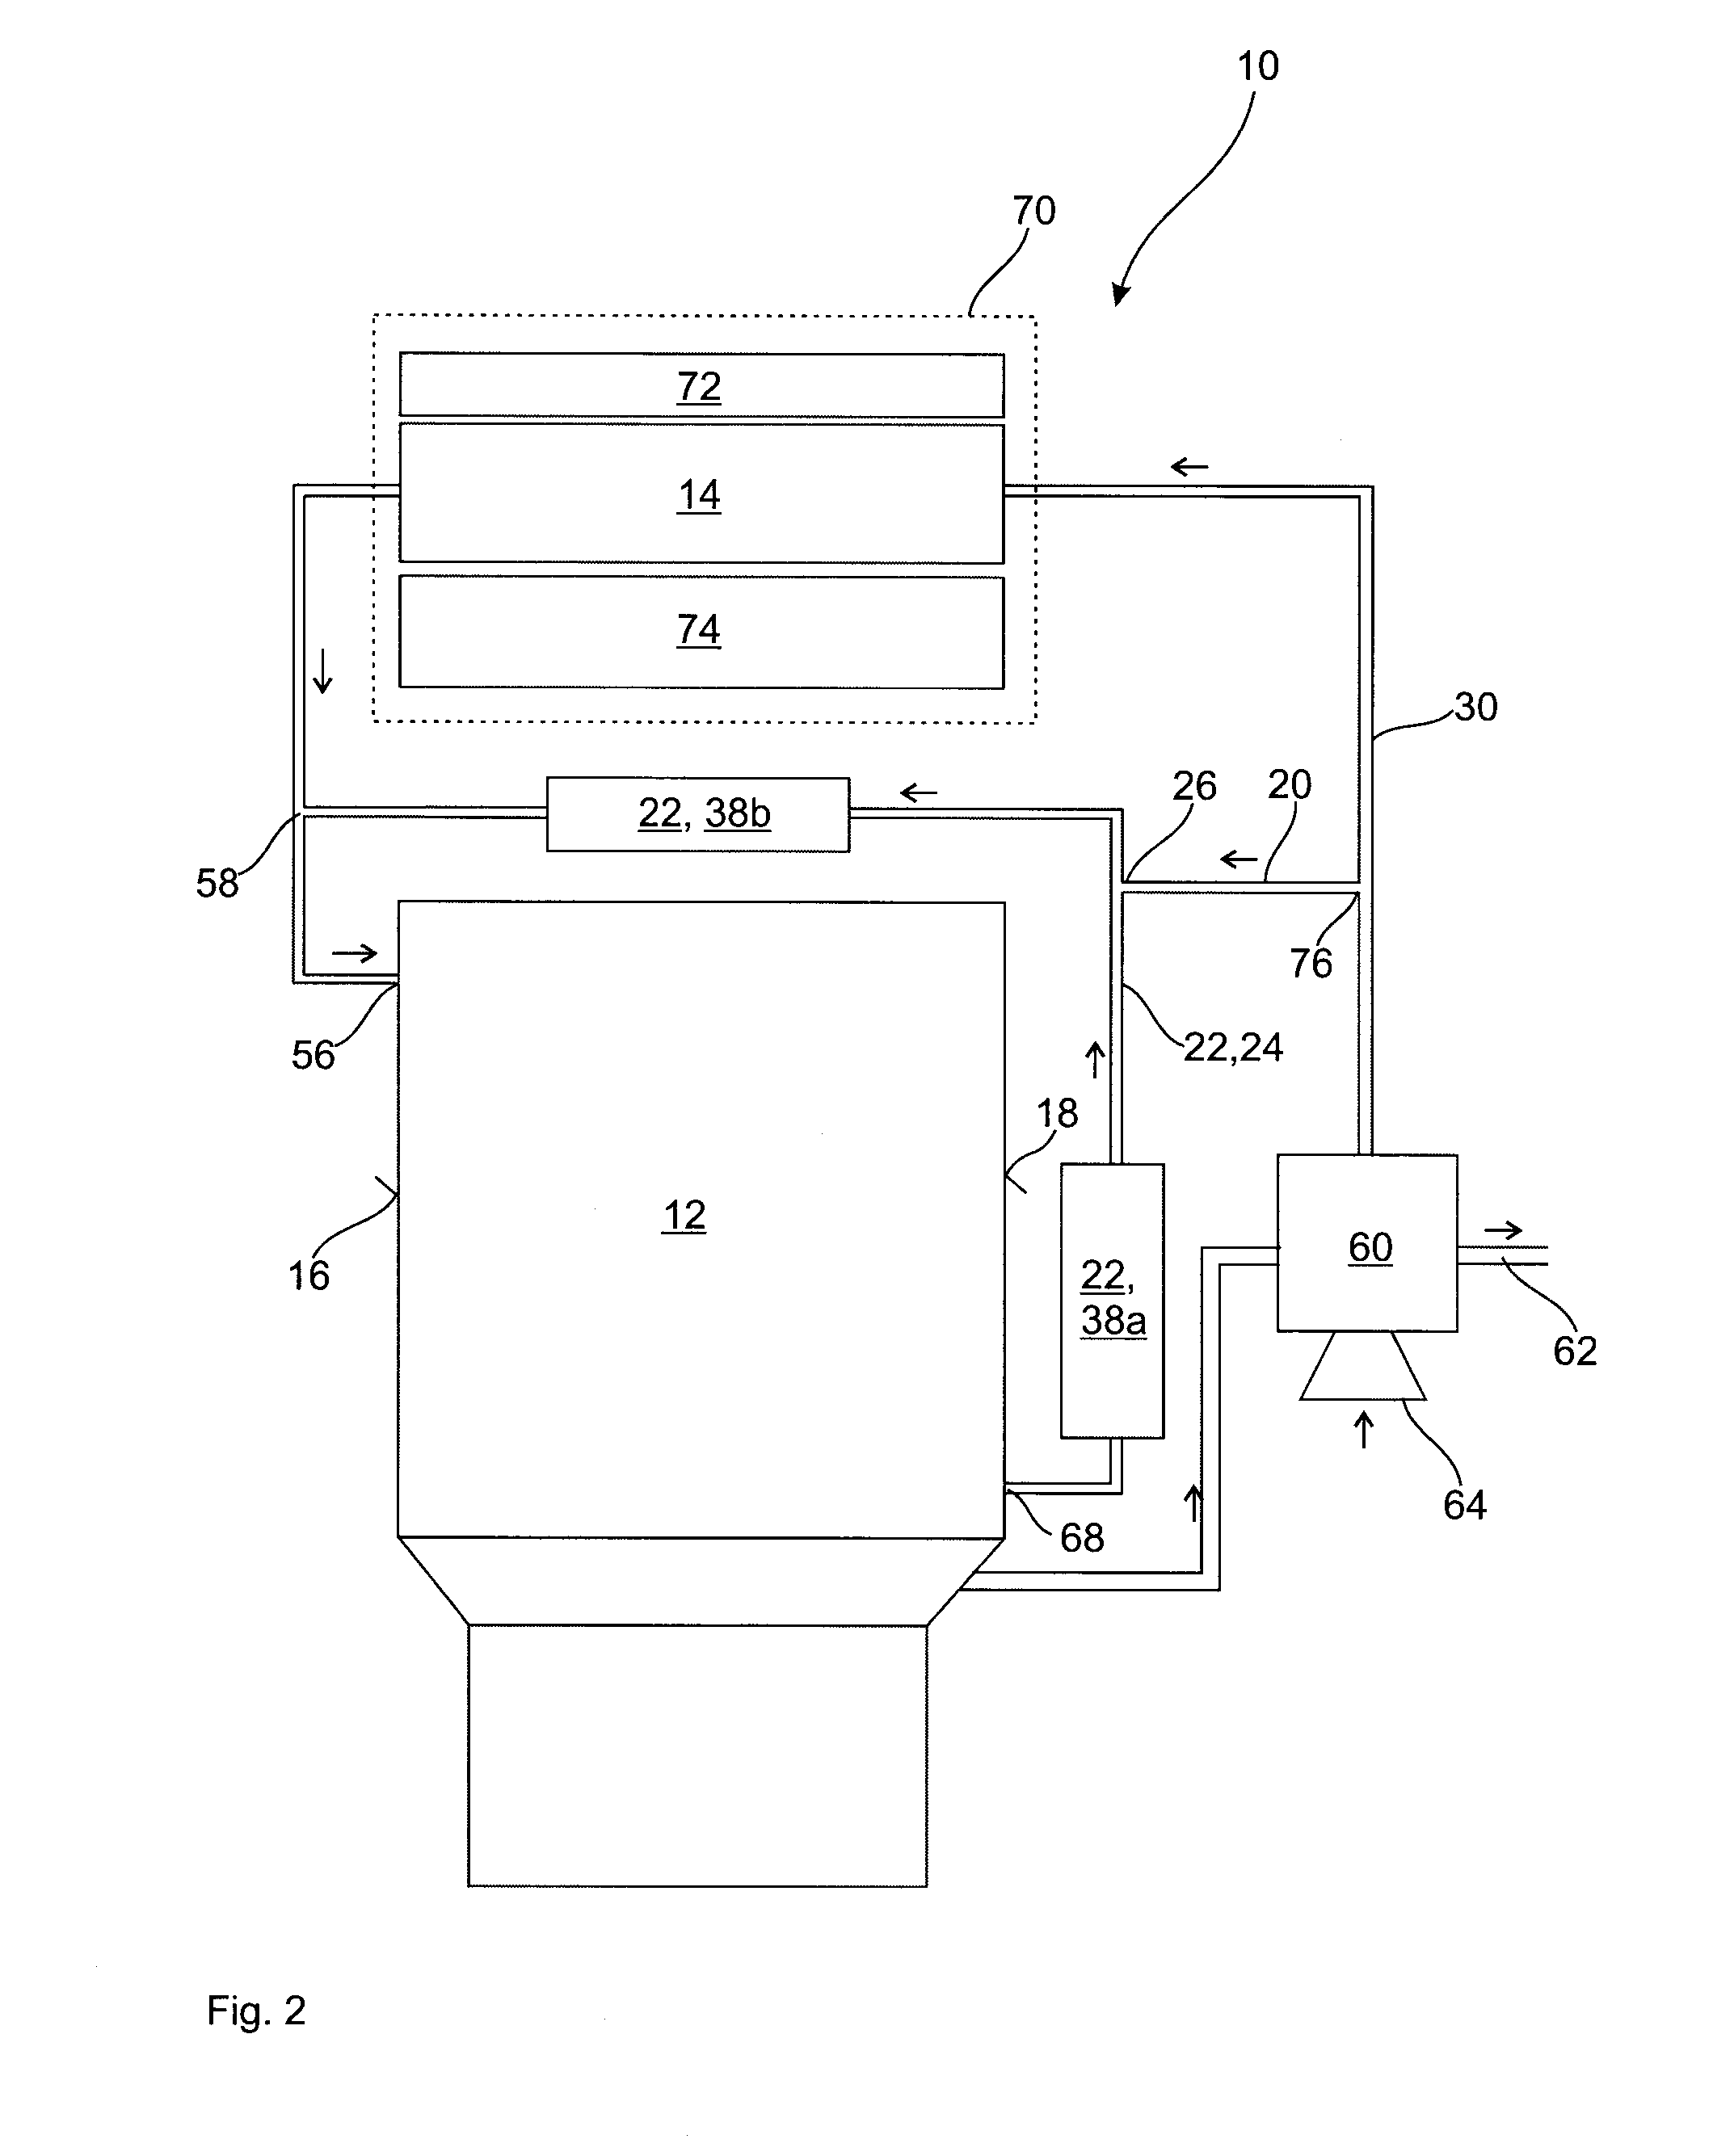 Engine arrangement with charge air cooler and egr system